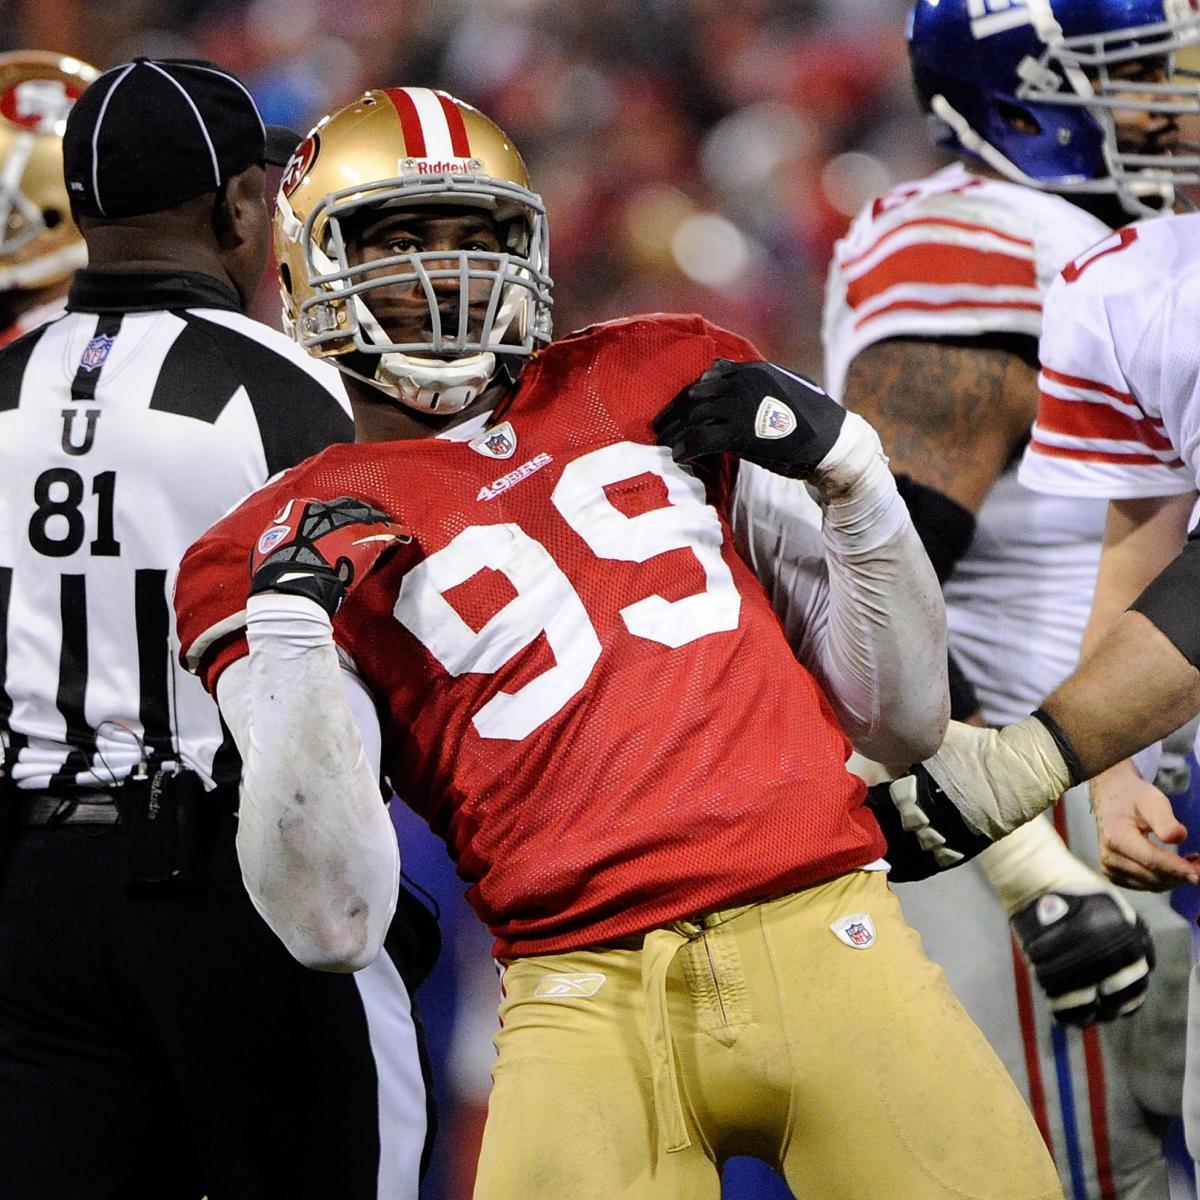 Aldon Smith Stabbed: 49ers Star Wounded in Altercation at Party | Bleacher Report ...1200 x 1200